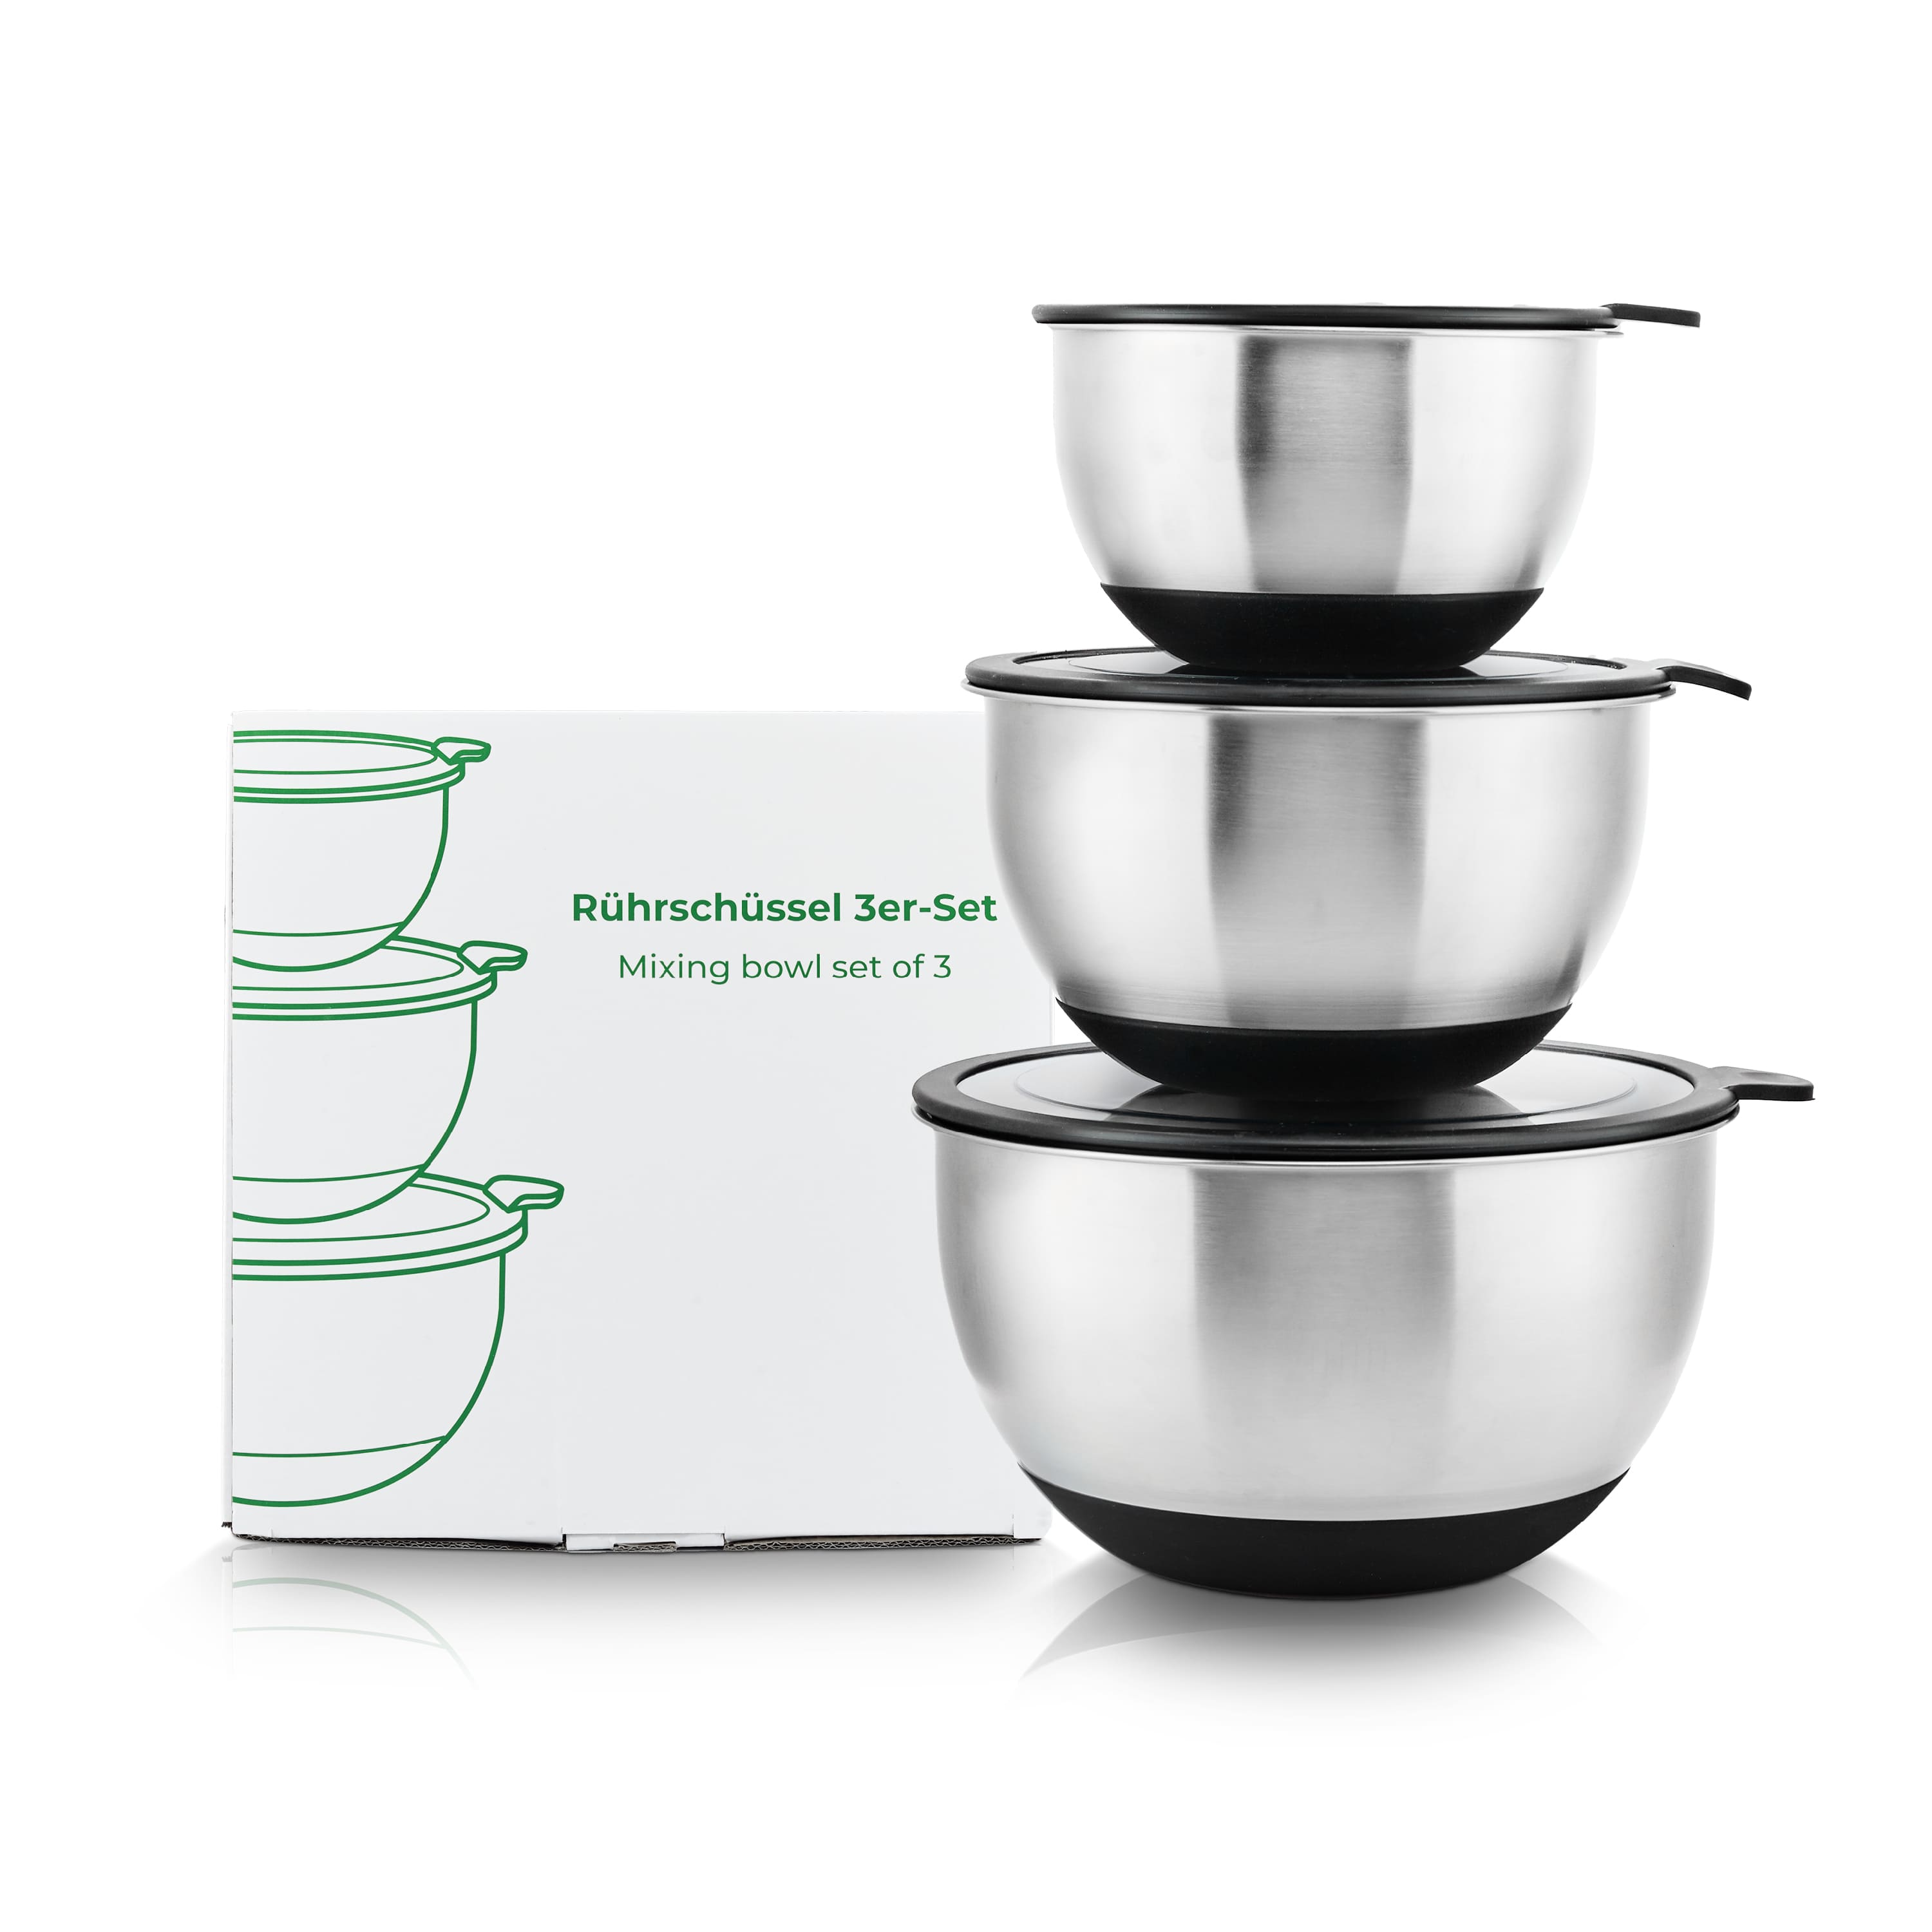 Stainless steel mixing bowl set of 3 with lid | 1.5L + 3L + 5L